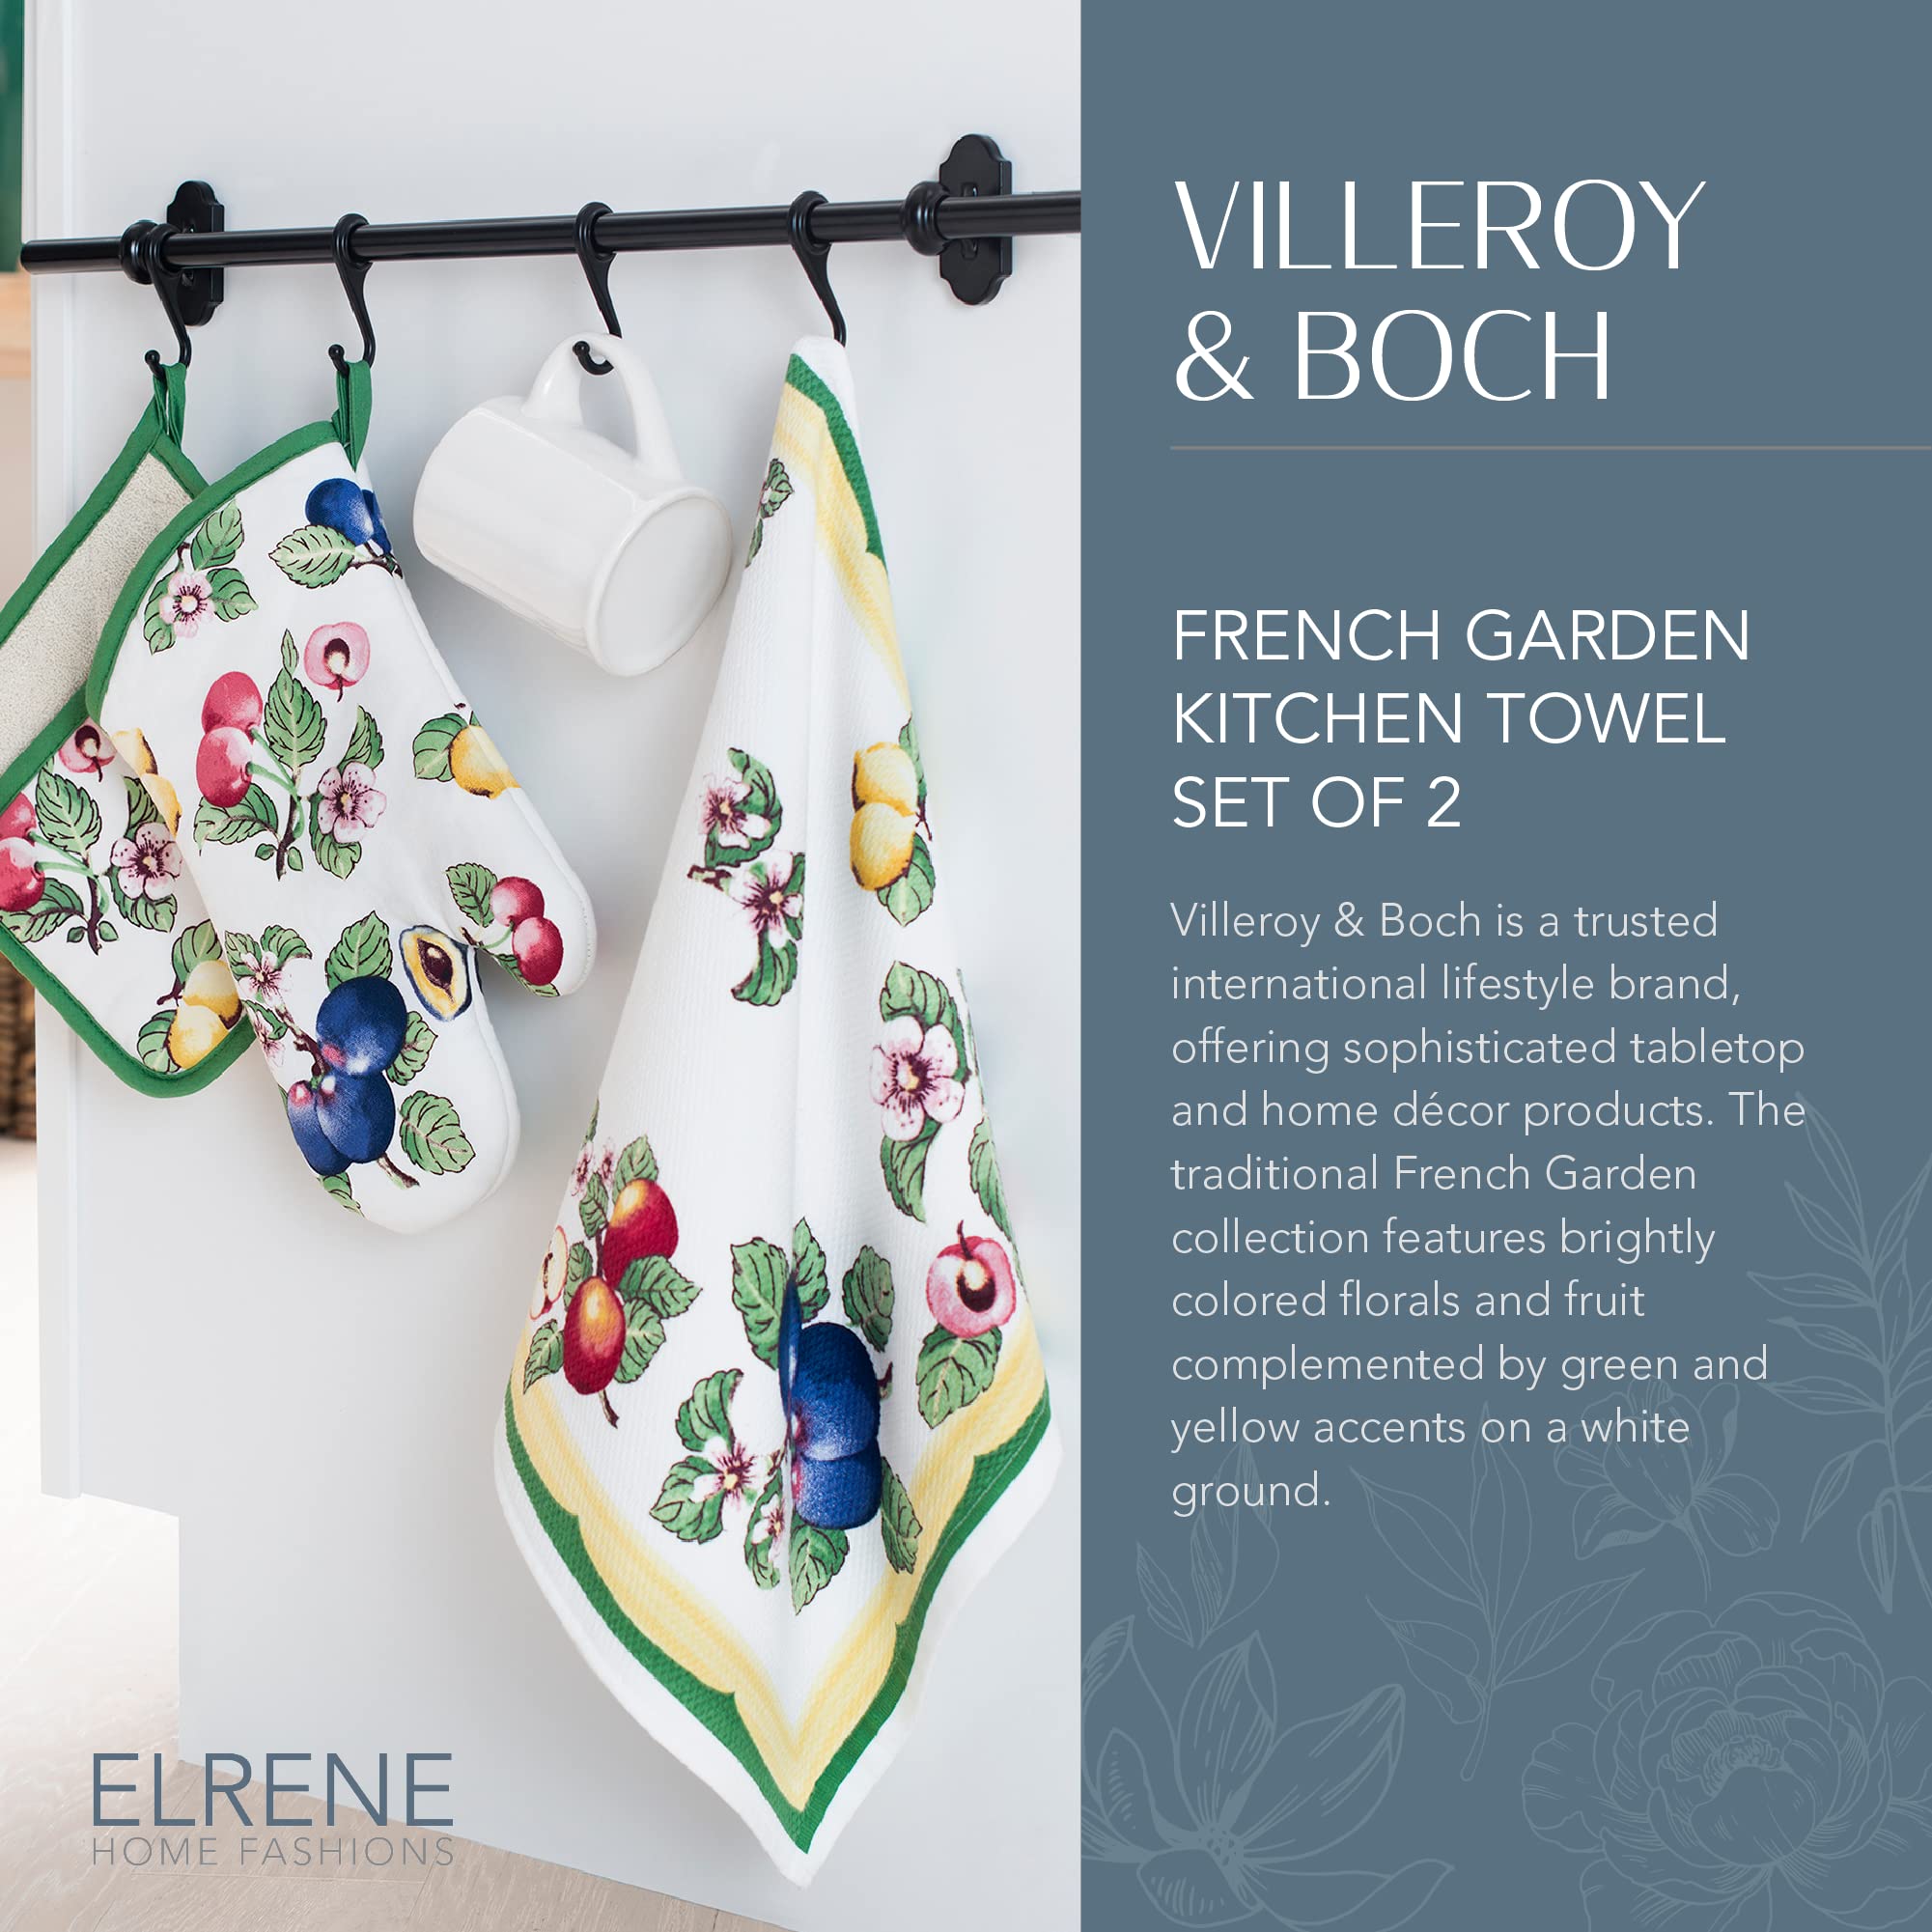 Elrene Home Fashions Villeroy & Boch French Garden Kitchen Towels, Dish Towels, 18 Inches by 28 Inches, Set of 2